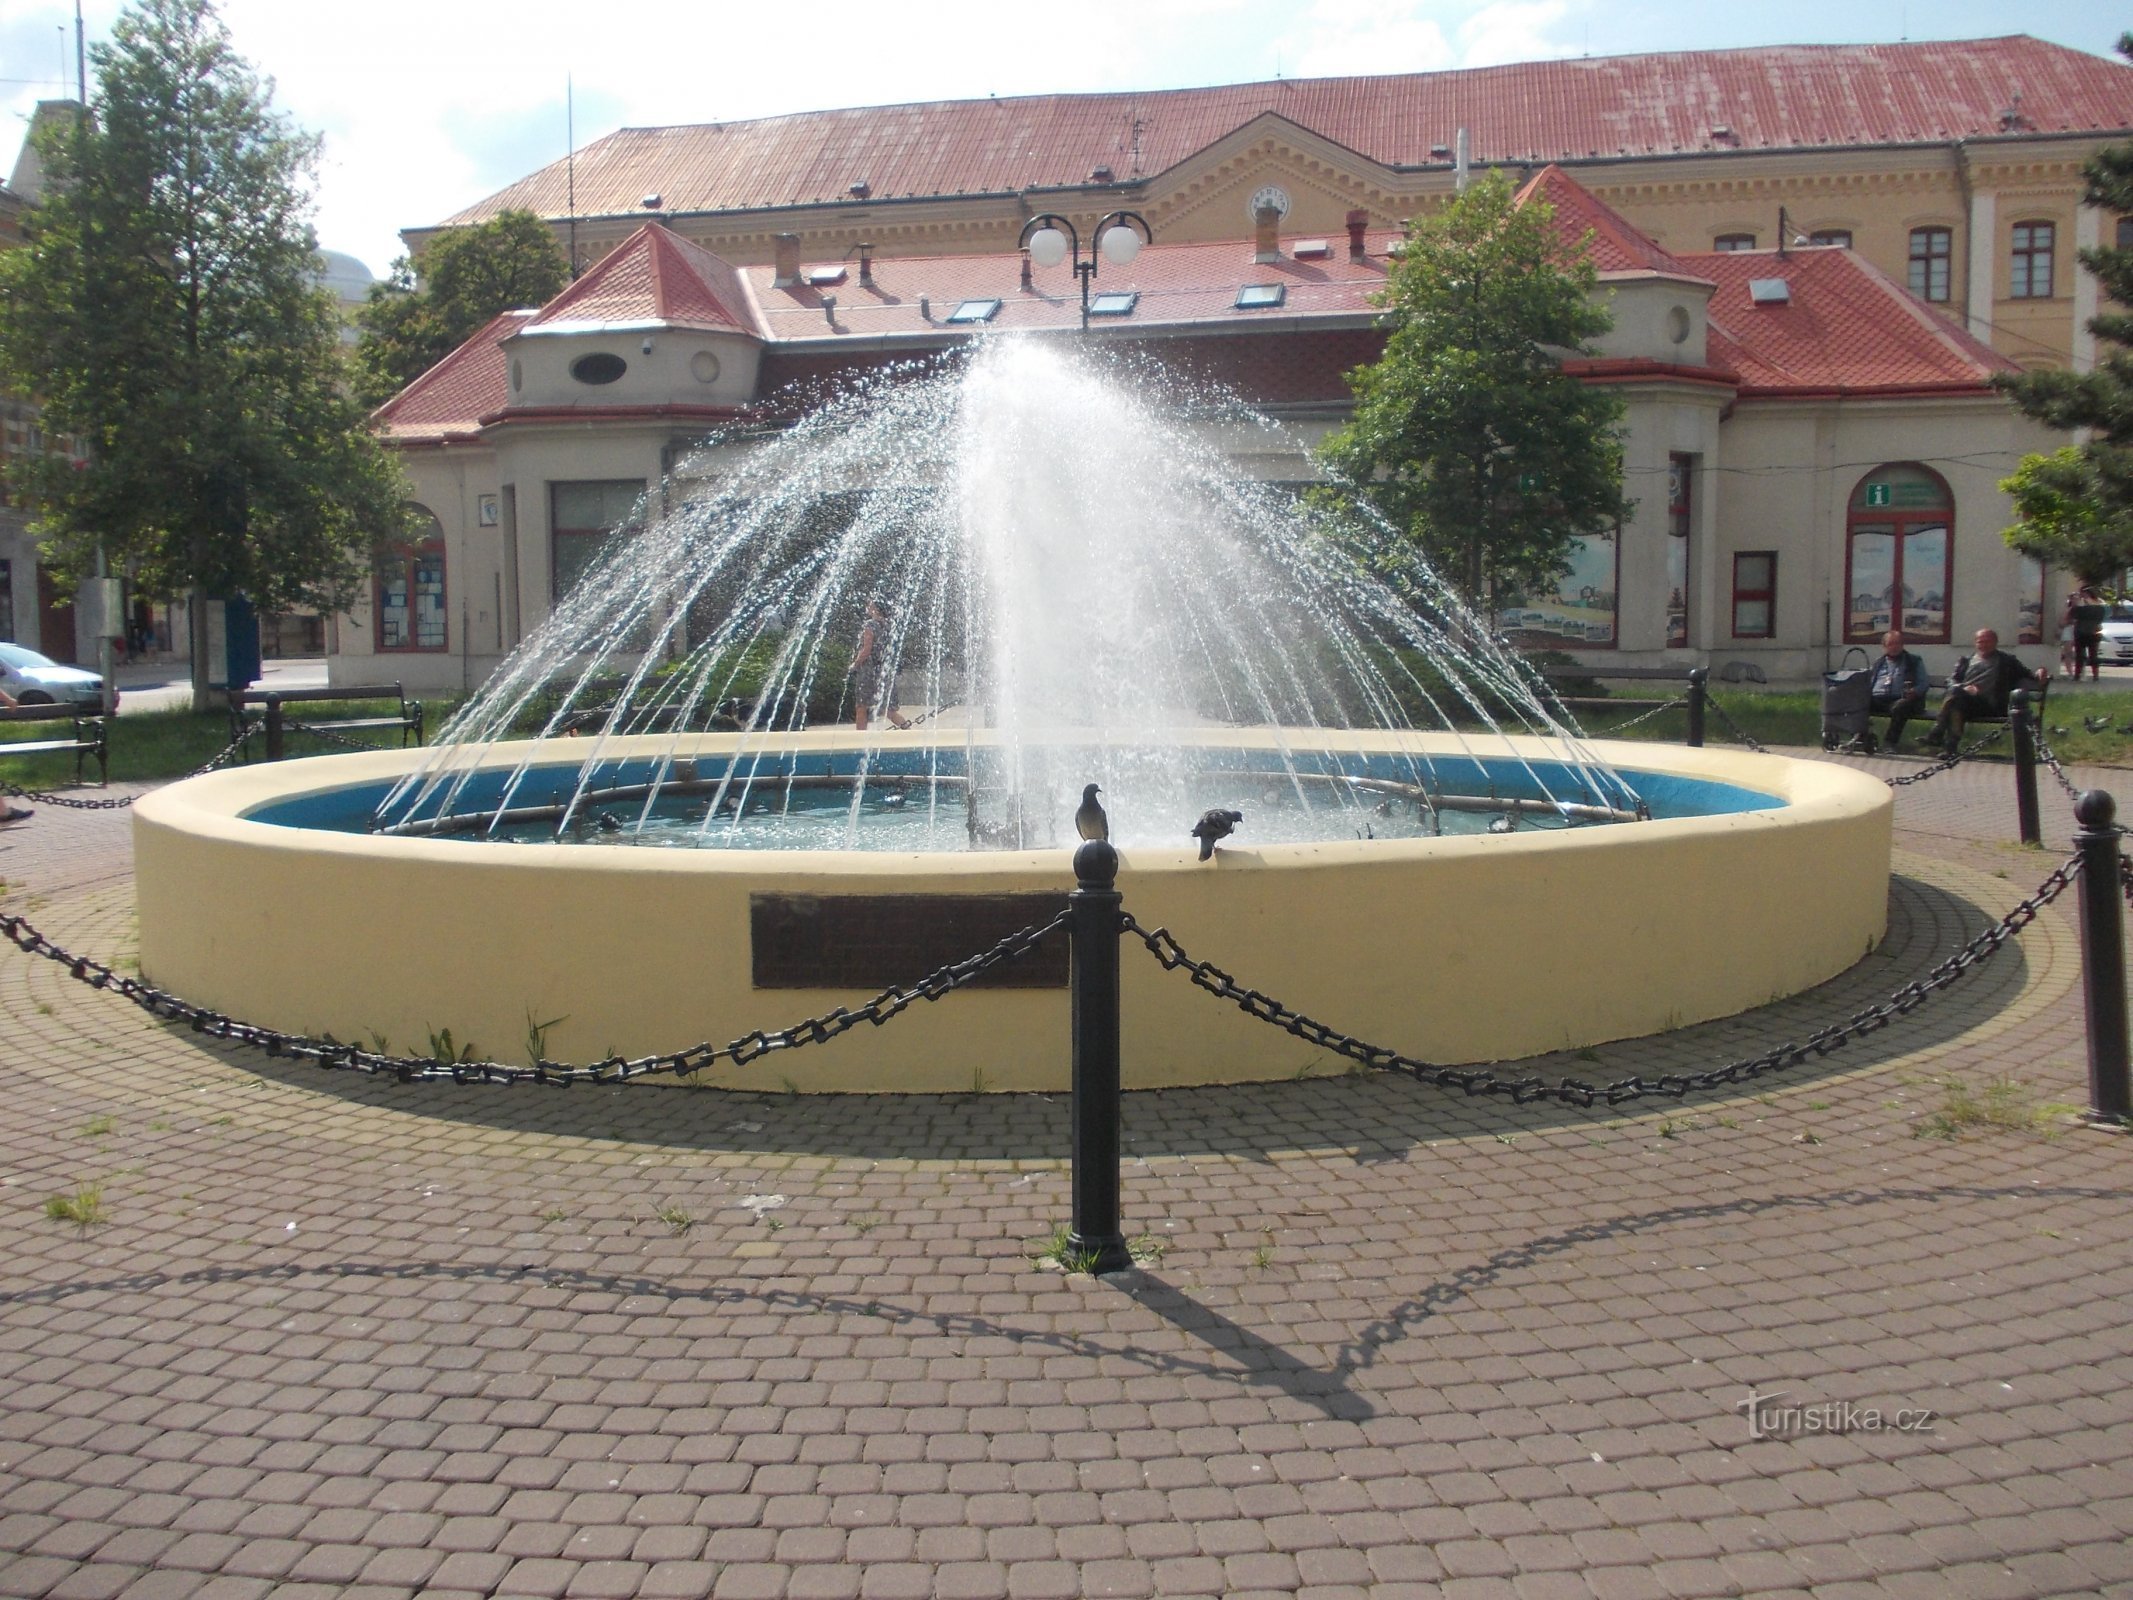 the fountain and the school building at the very back